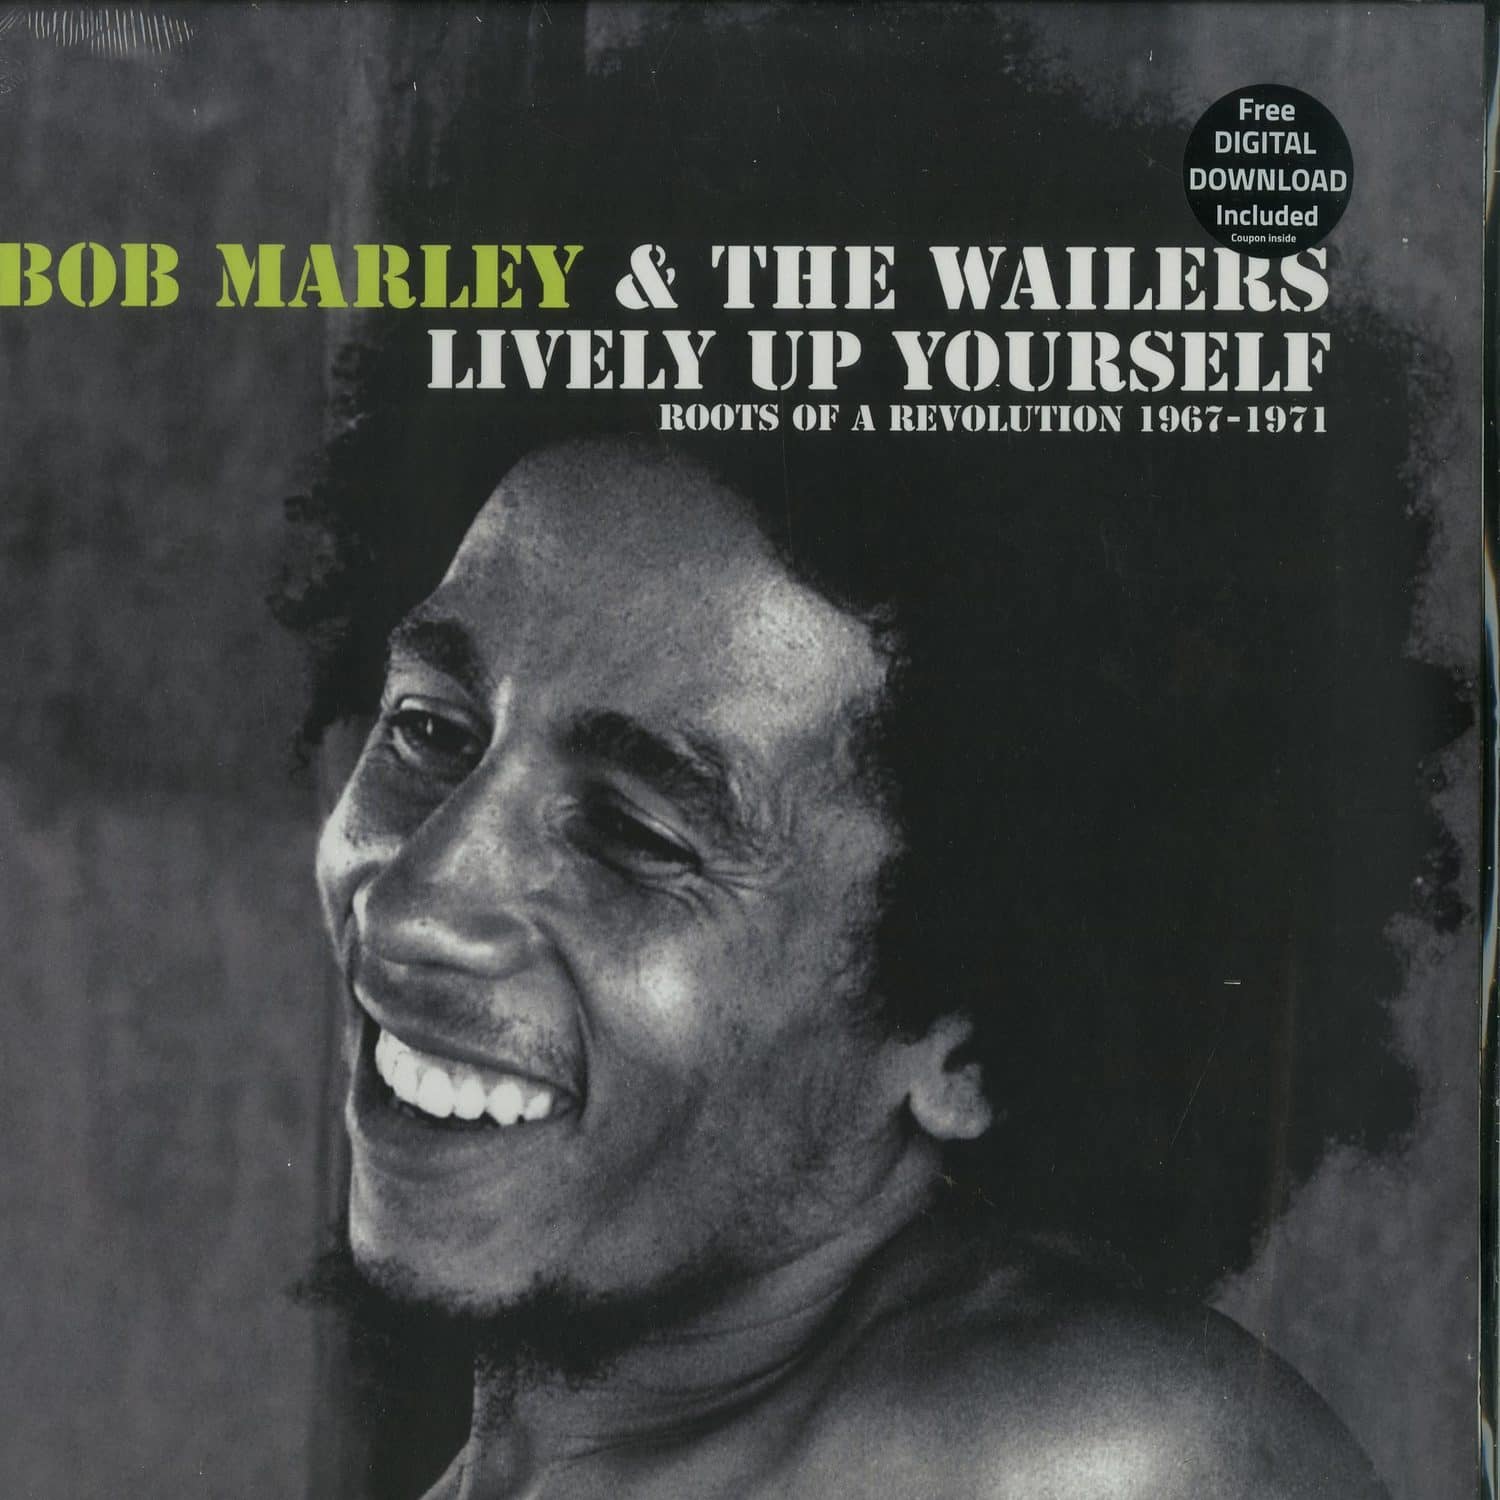 Bob Marley & The Wailers - LIVELY UP YOURSELF - ROOTS OF A REVOLUTION 1967-1971 